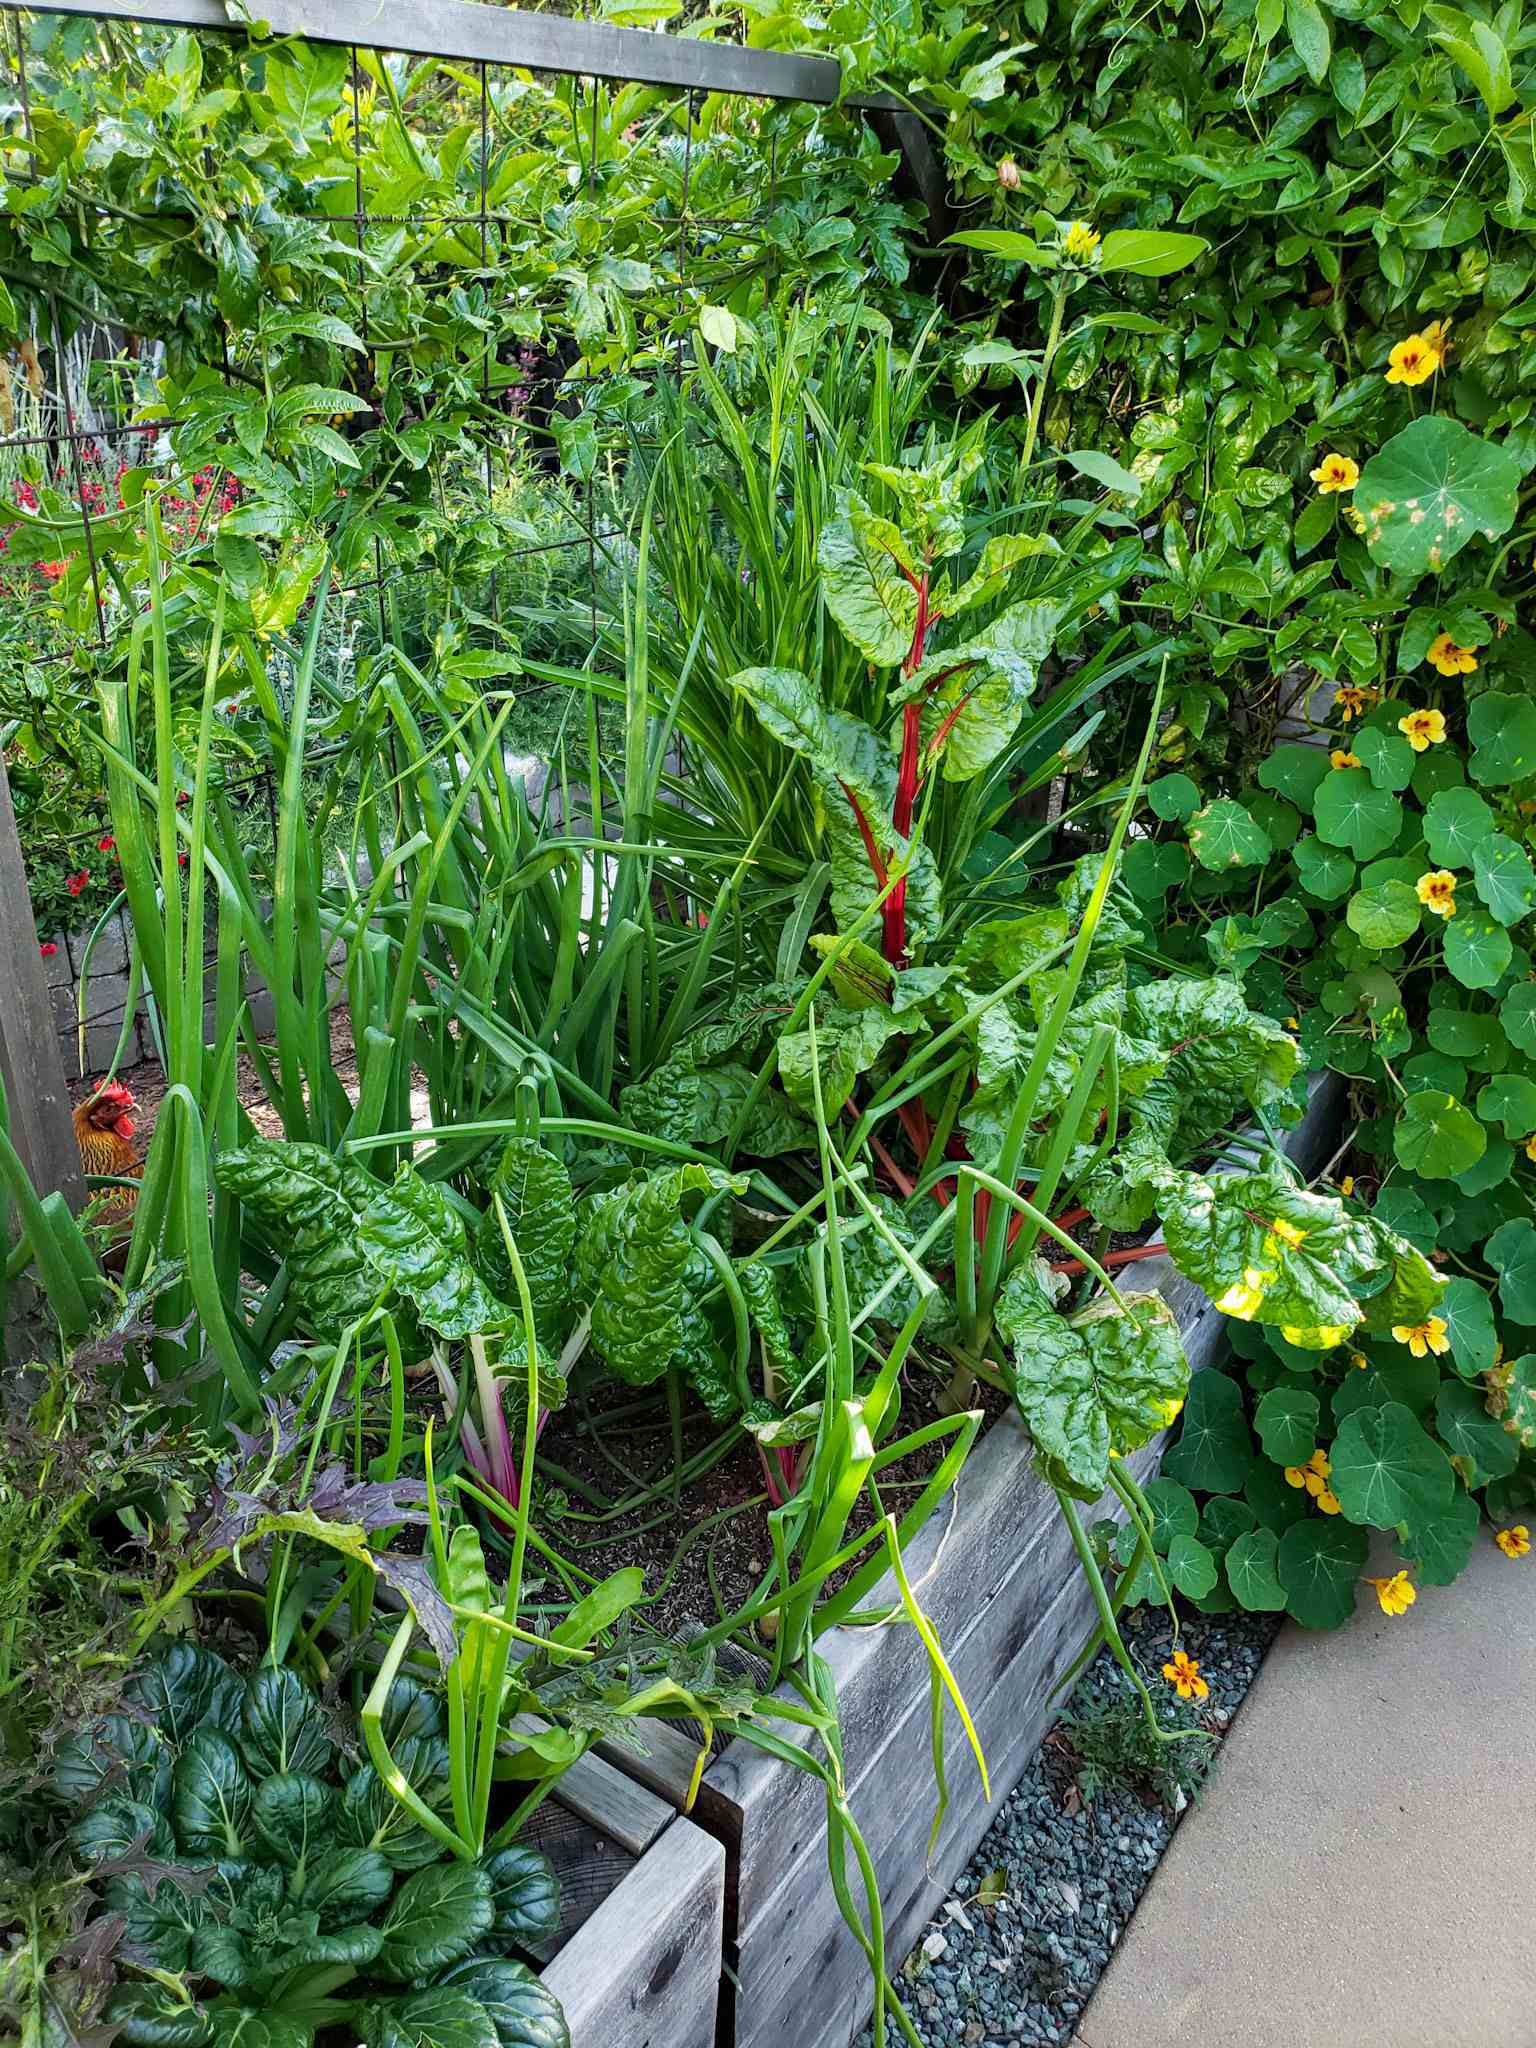 A raised garden bed full of swiss chard planted amongst onions. There is also nasturtium and passion fruit vines in the rear of the bed. There are various flowering plants amidst a green sea of plants in the background beyond. 